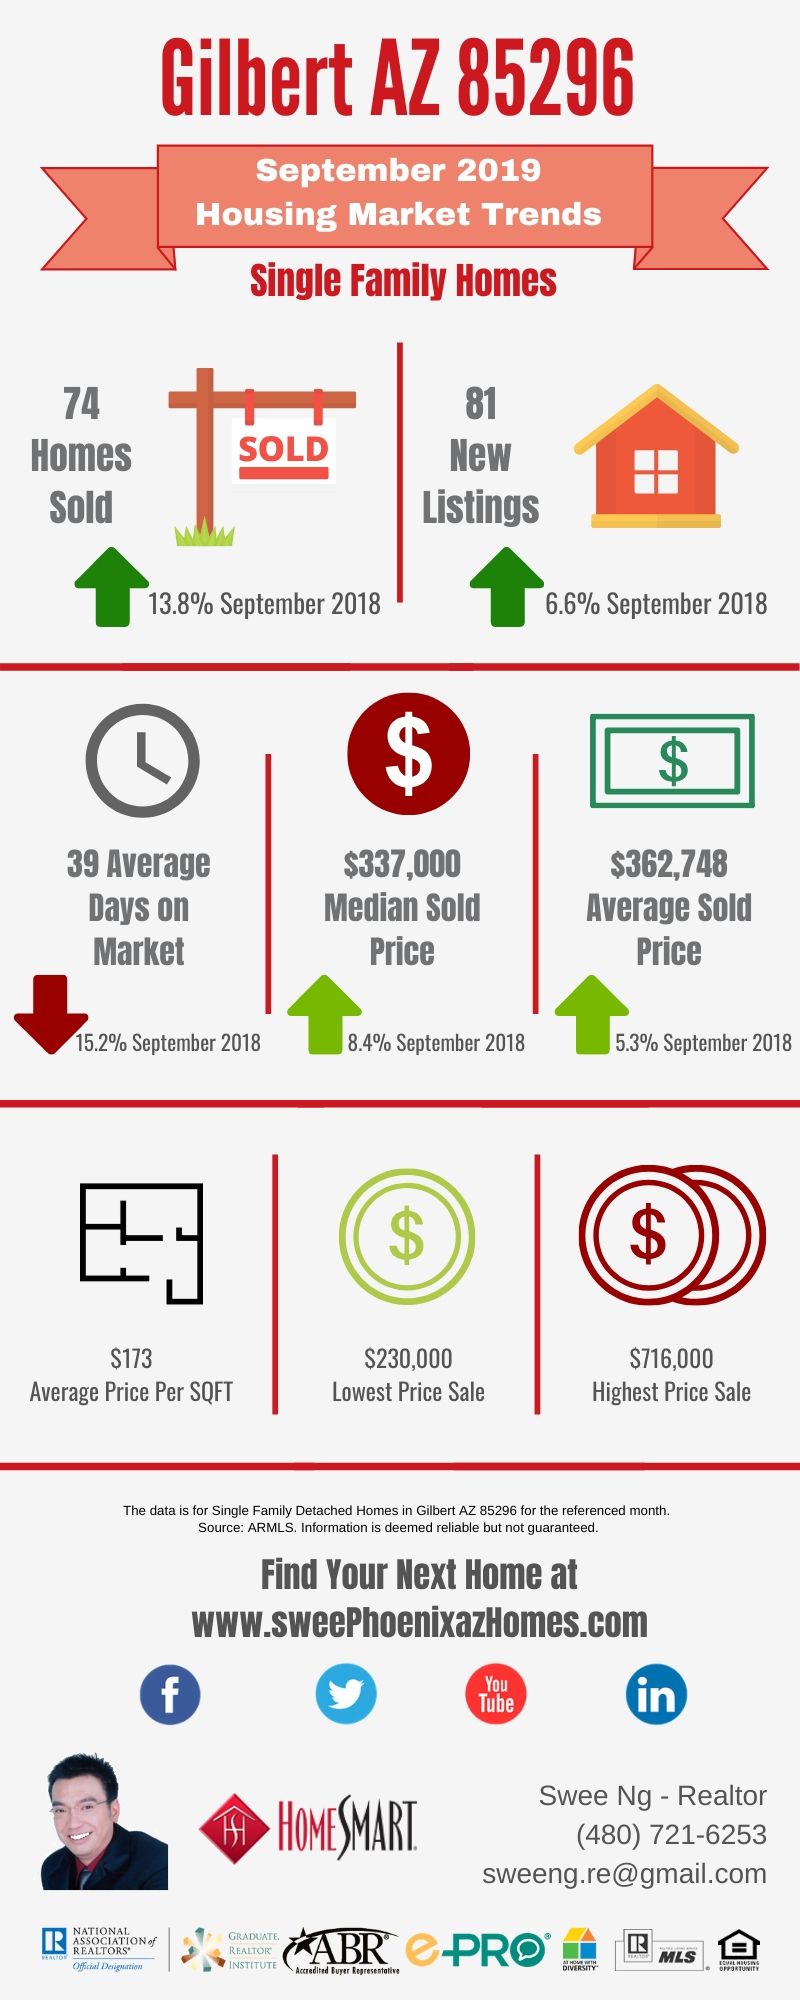 Gilbert AZ 85296 Housing Market Trends Report September 2019 by Swee Ng, Real Estate and House Value